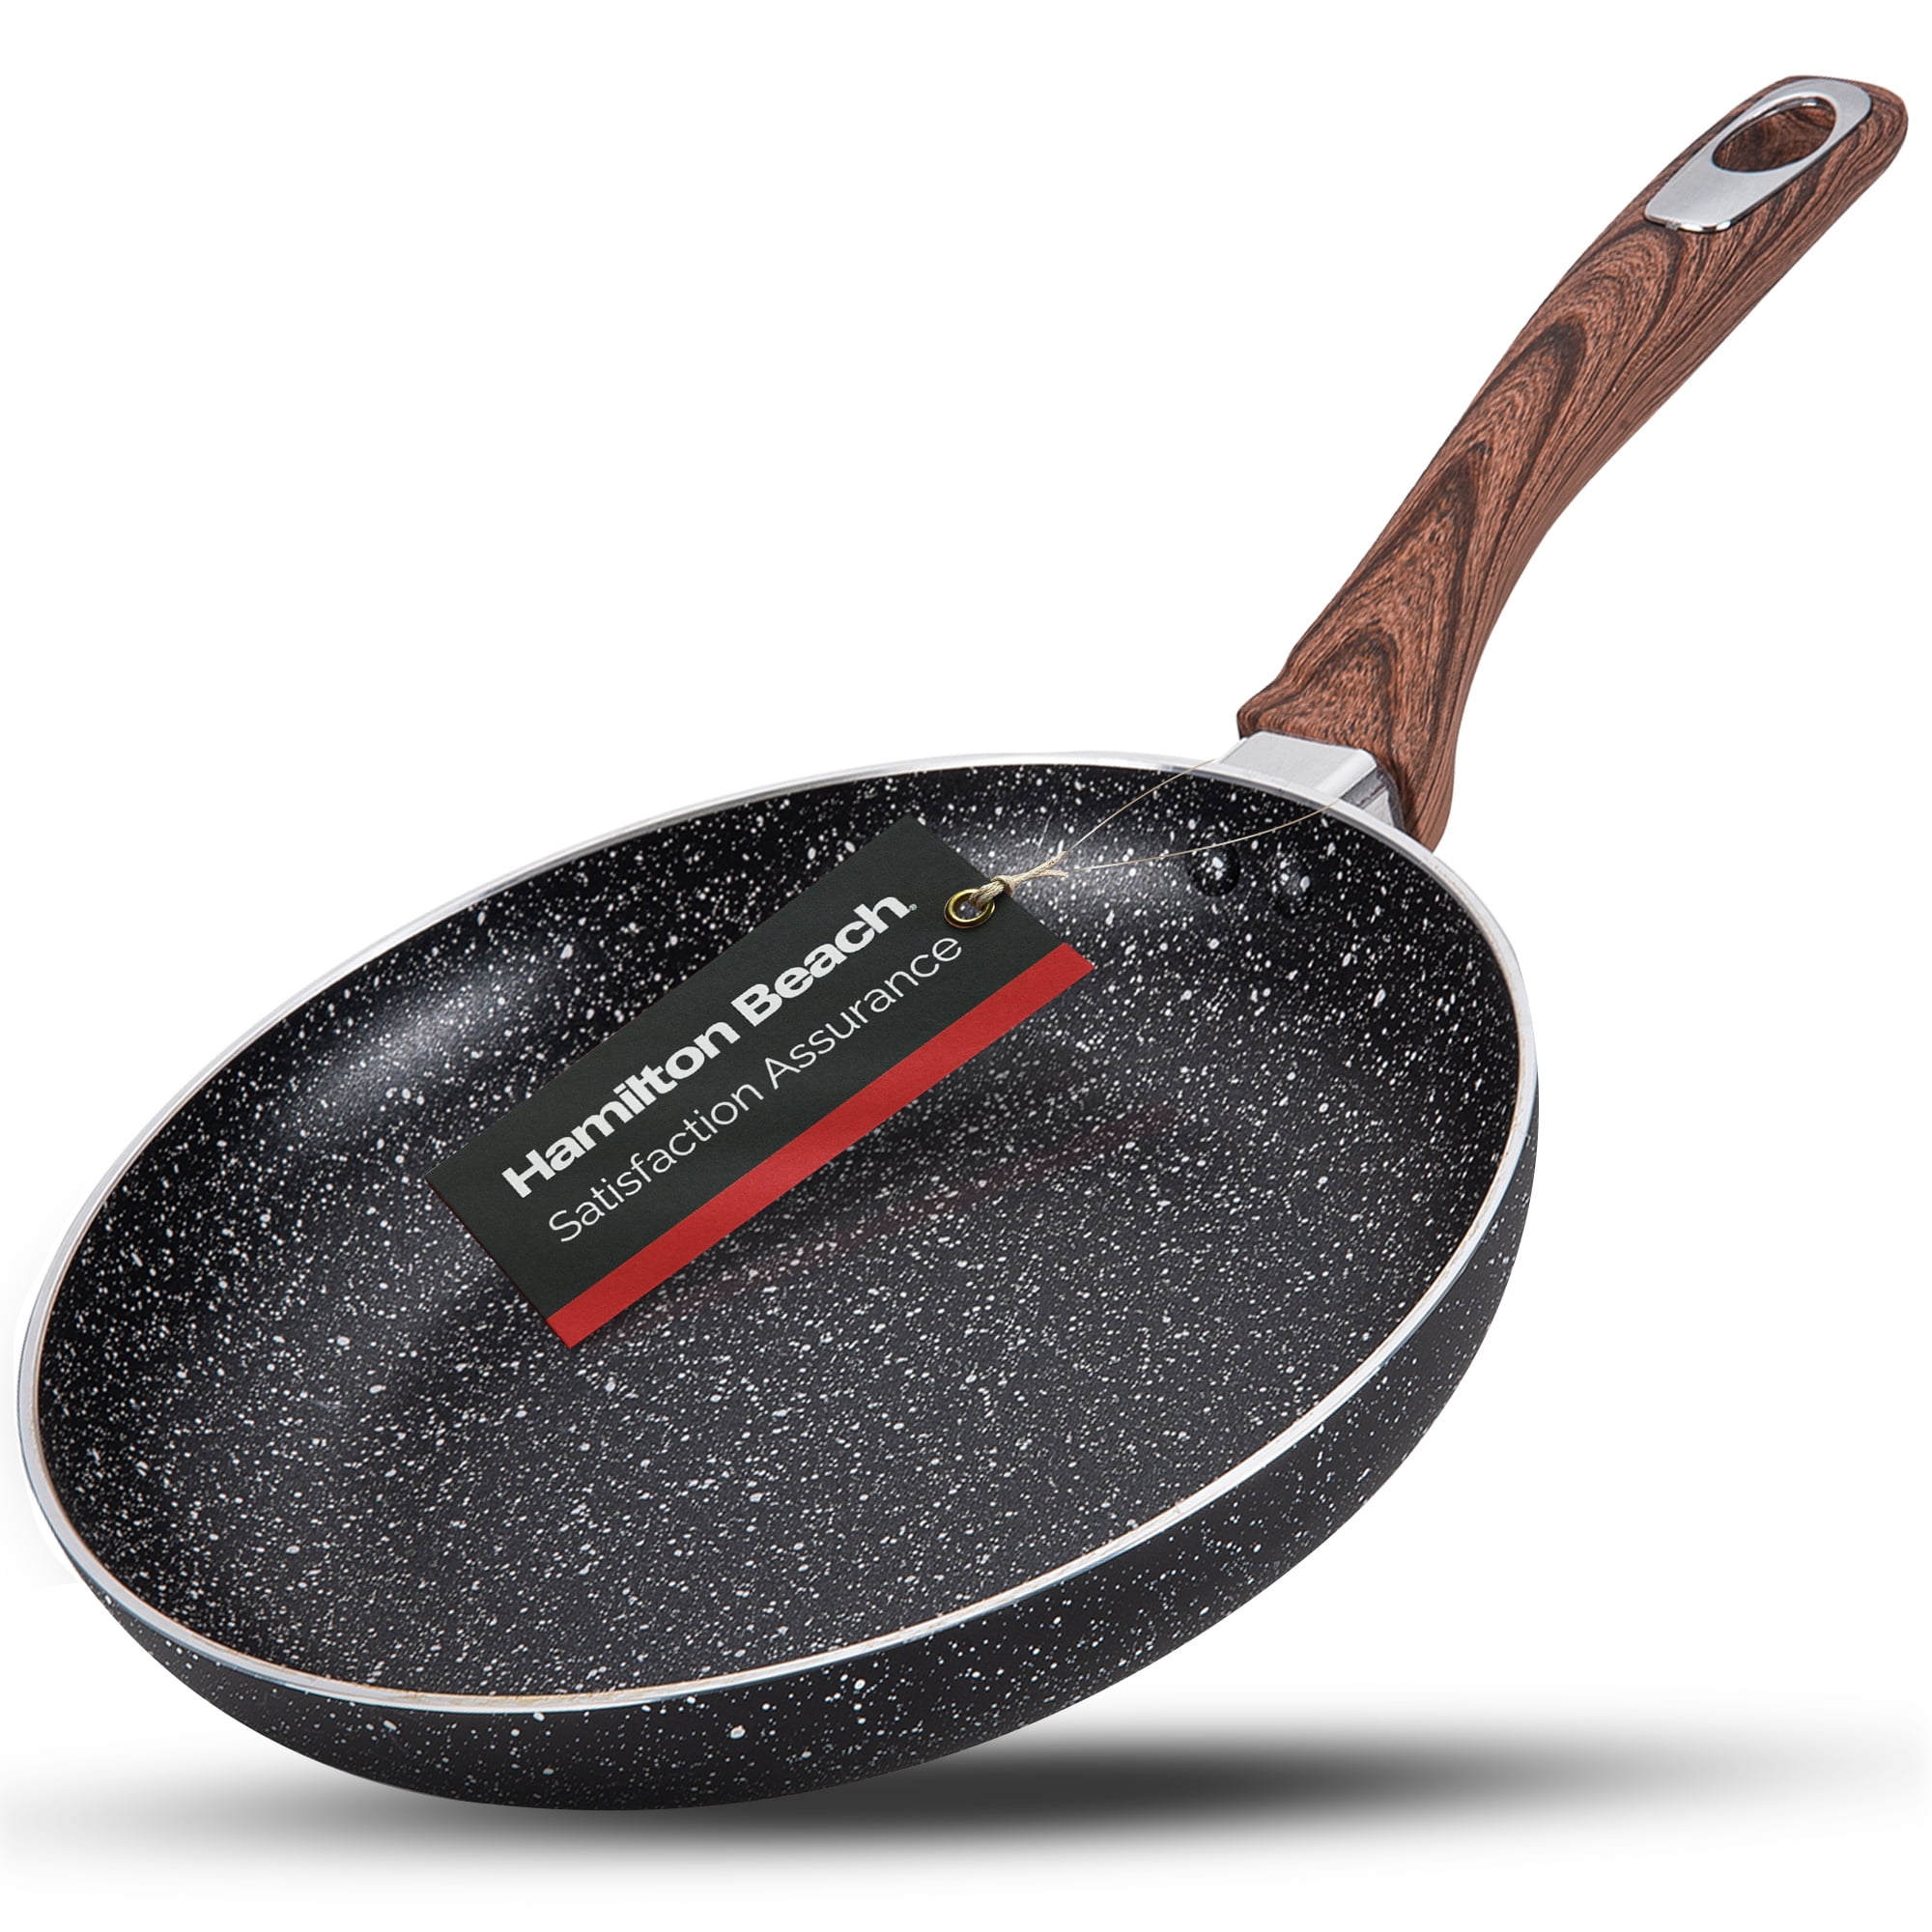 Beautiful 10in Ceramic Non-Stick Fry Pan, White Icing by Drew Barrymore - Black Sesame